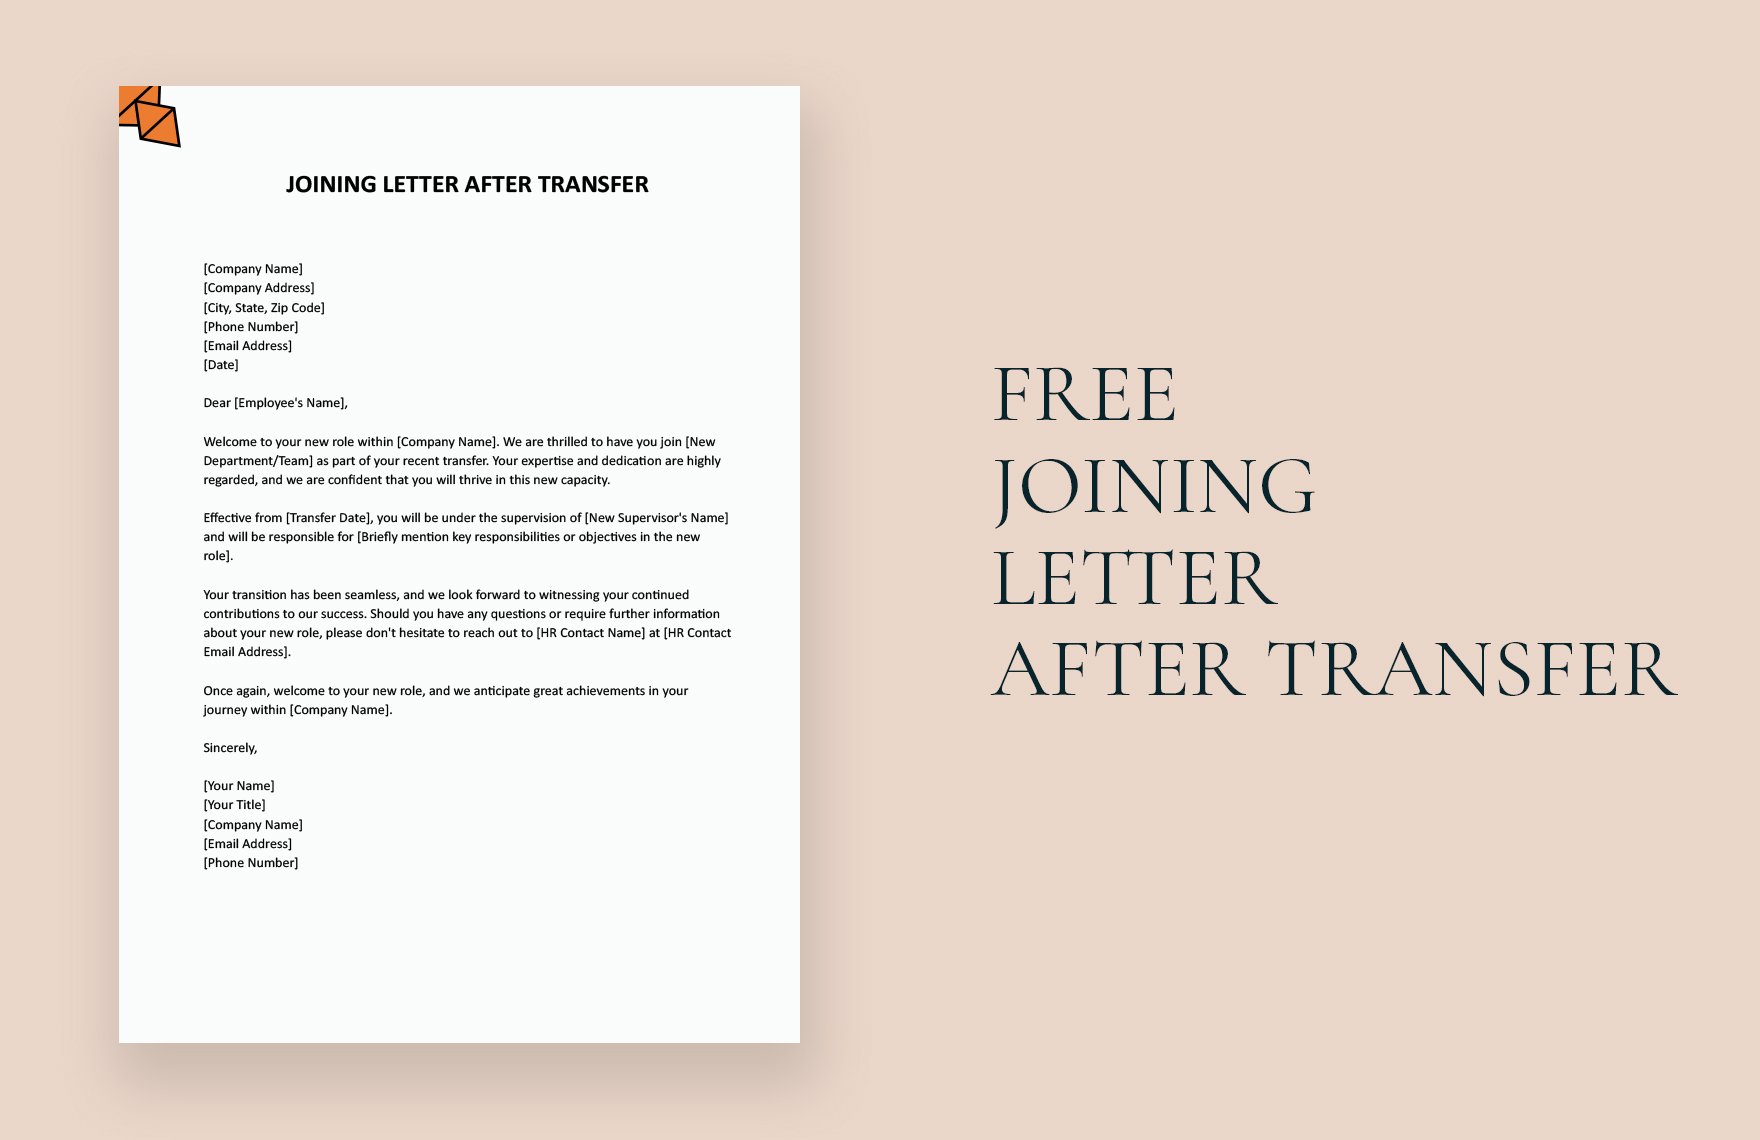 Joining Letter After Transfer